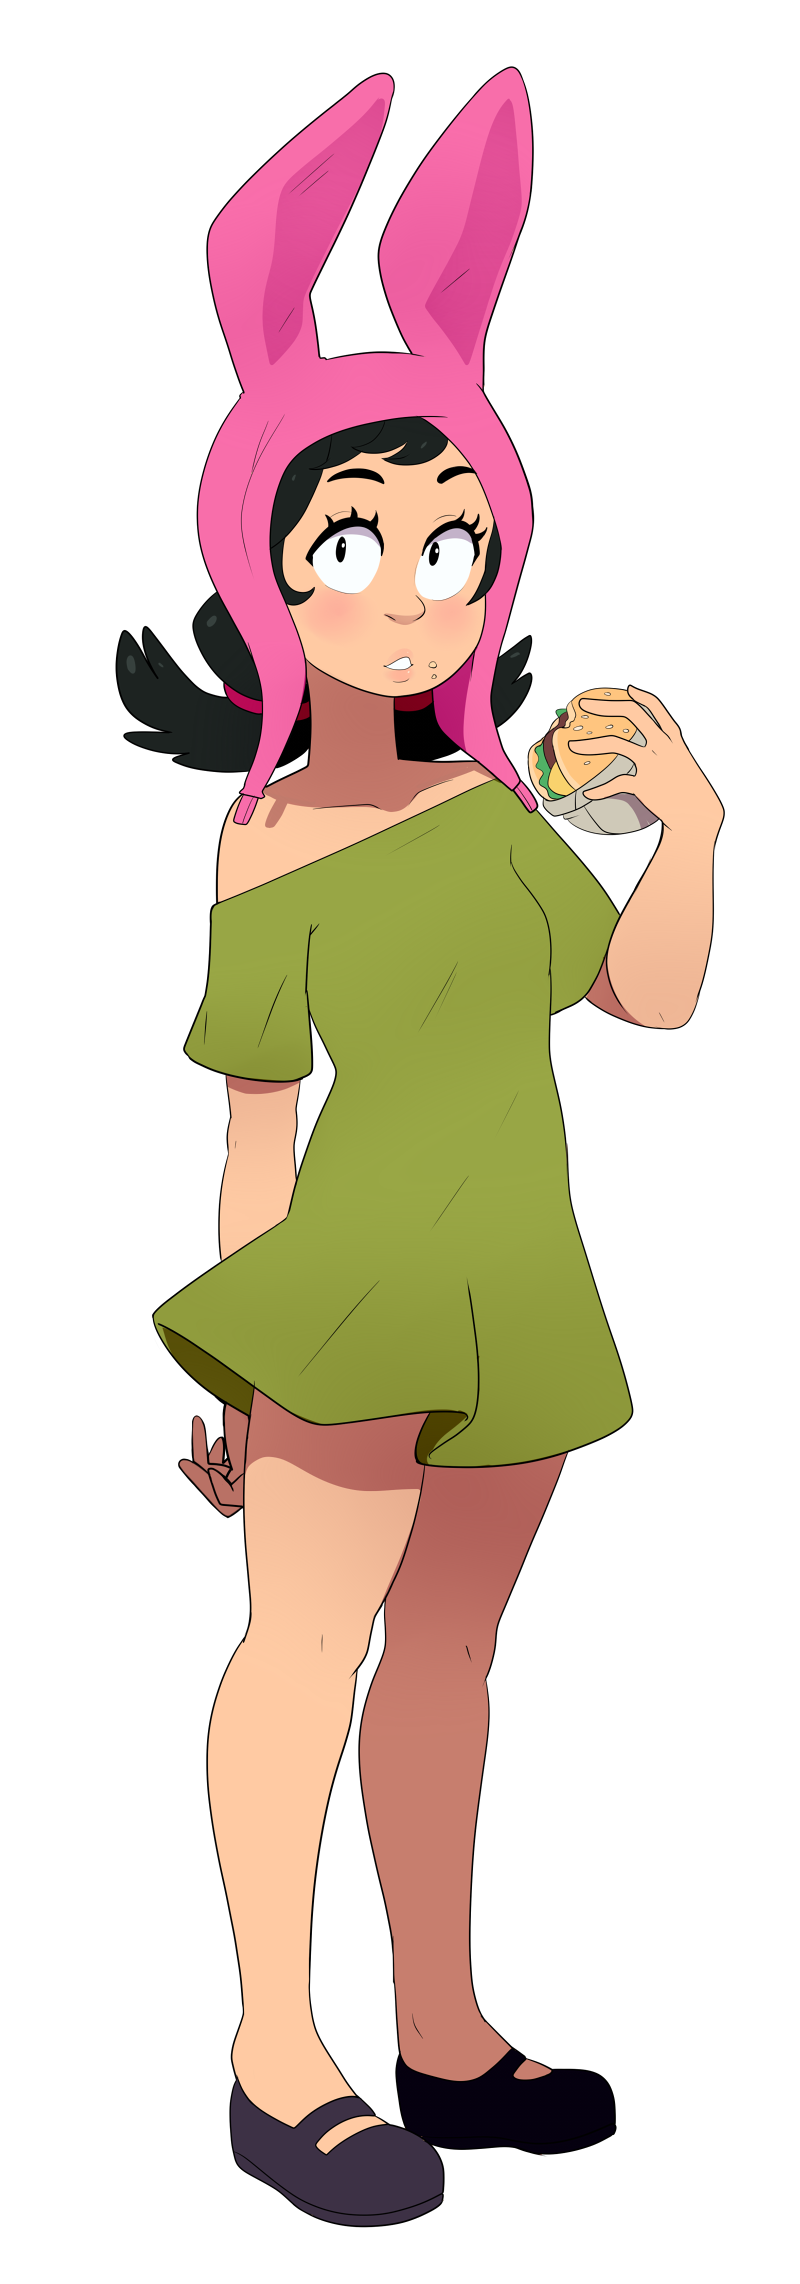 louise_belcher_by_angeliccmadness_dcyop45.png. dcyop45-df3d9455-489d-45c0-8...